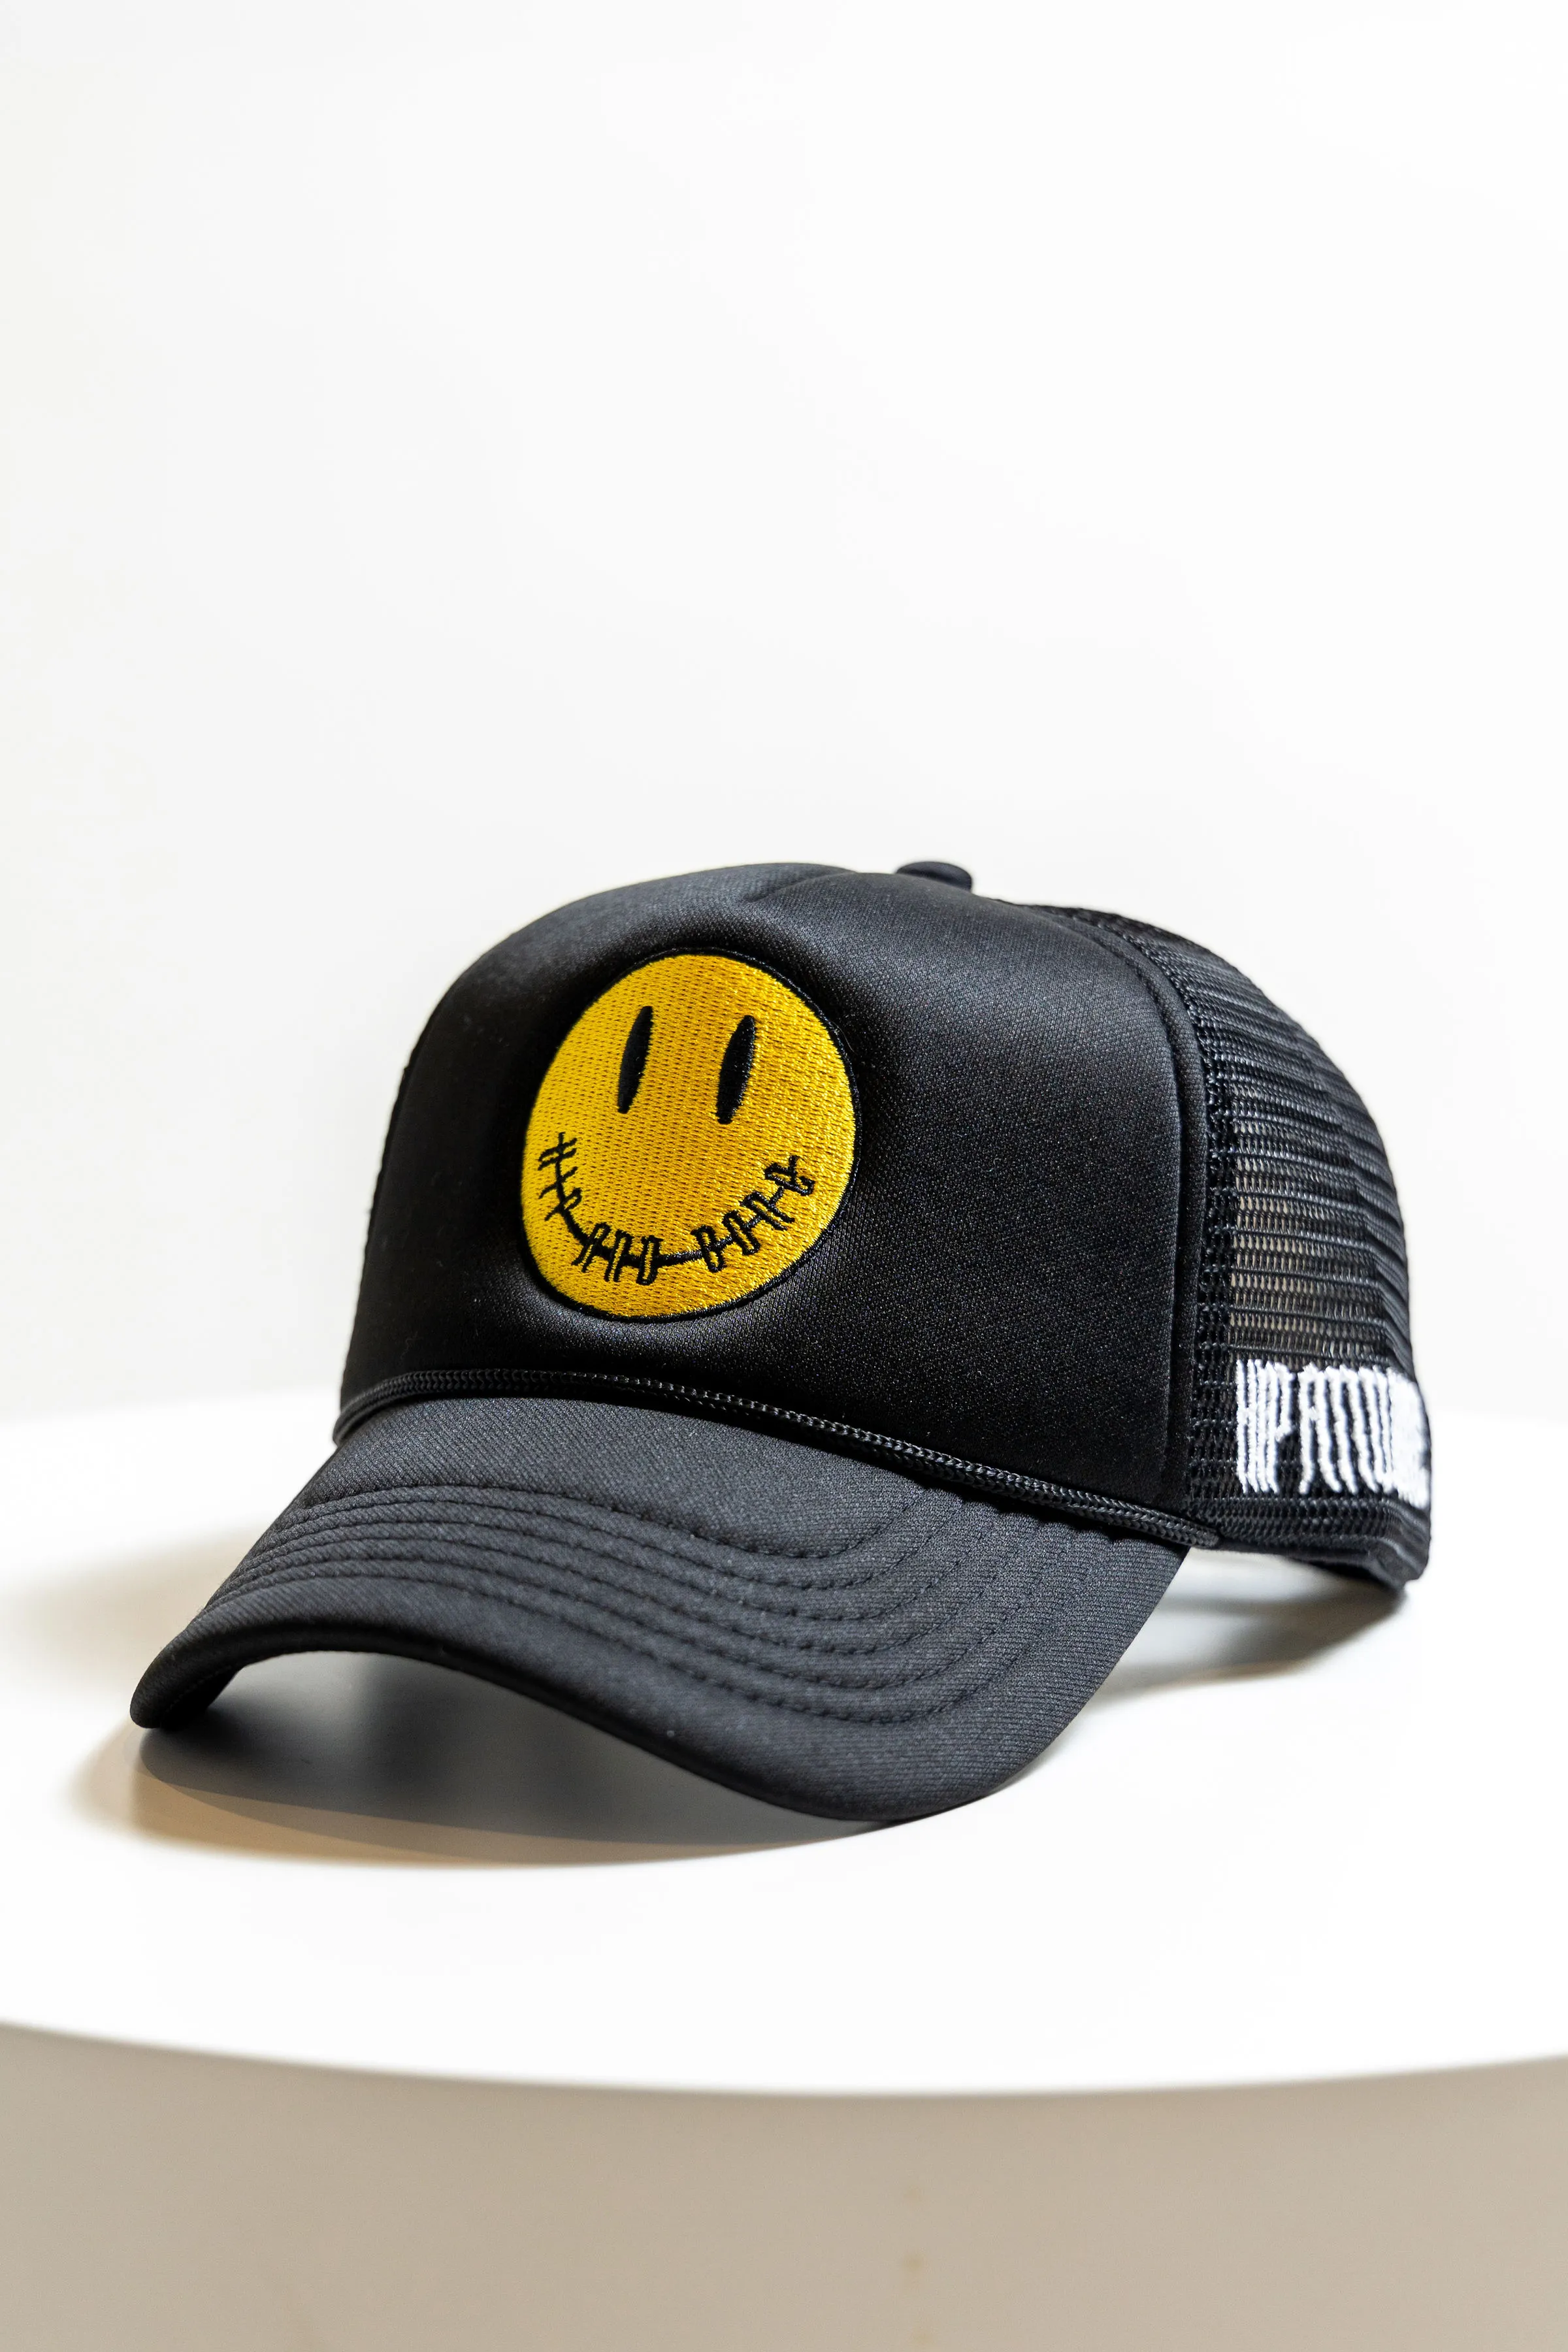 SMILEY TRUCKER HATS by Hip and bone